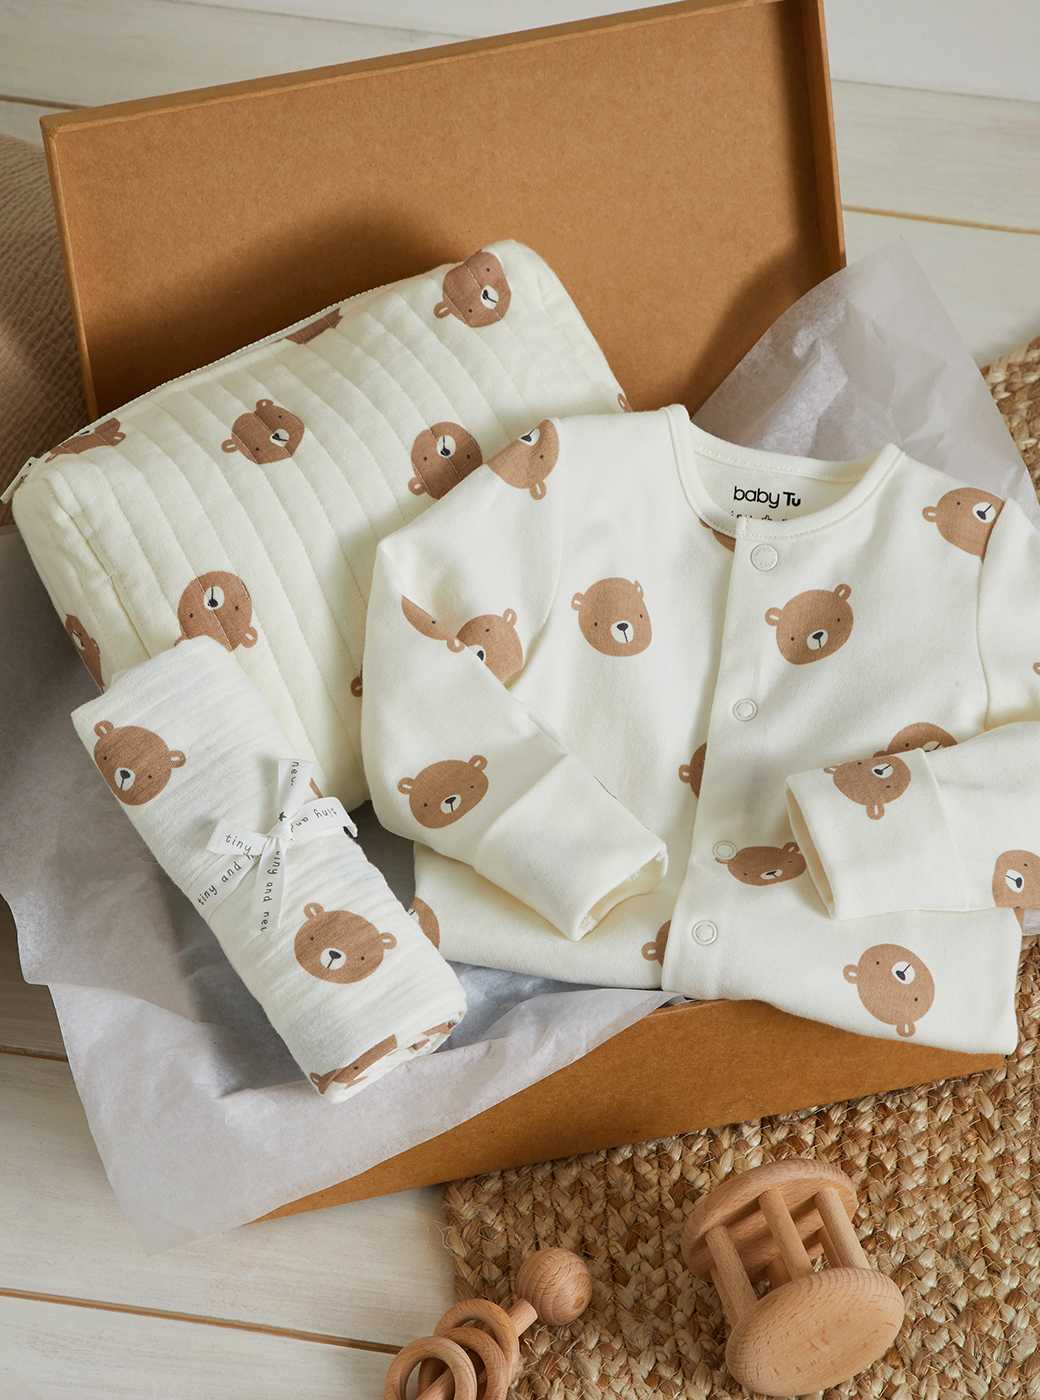 For your new arrival. Shop newborn gifting.